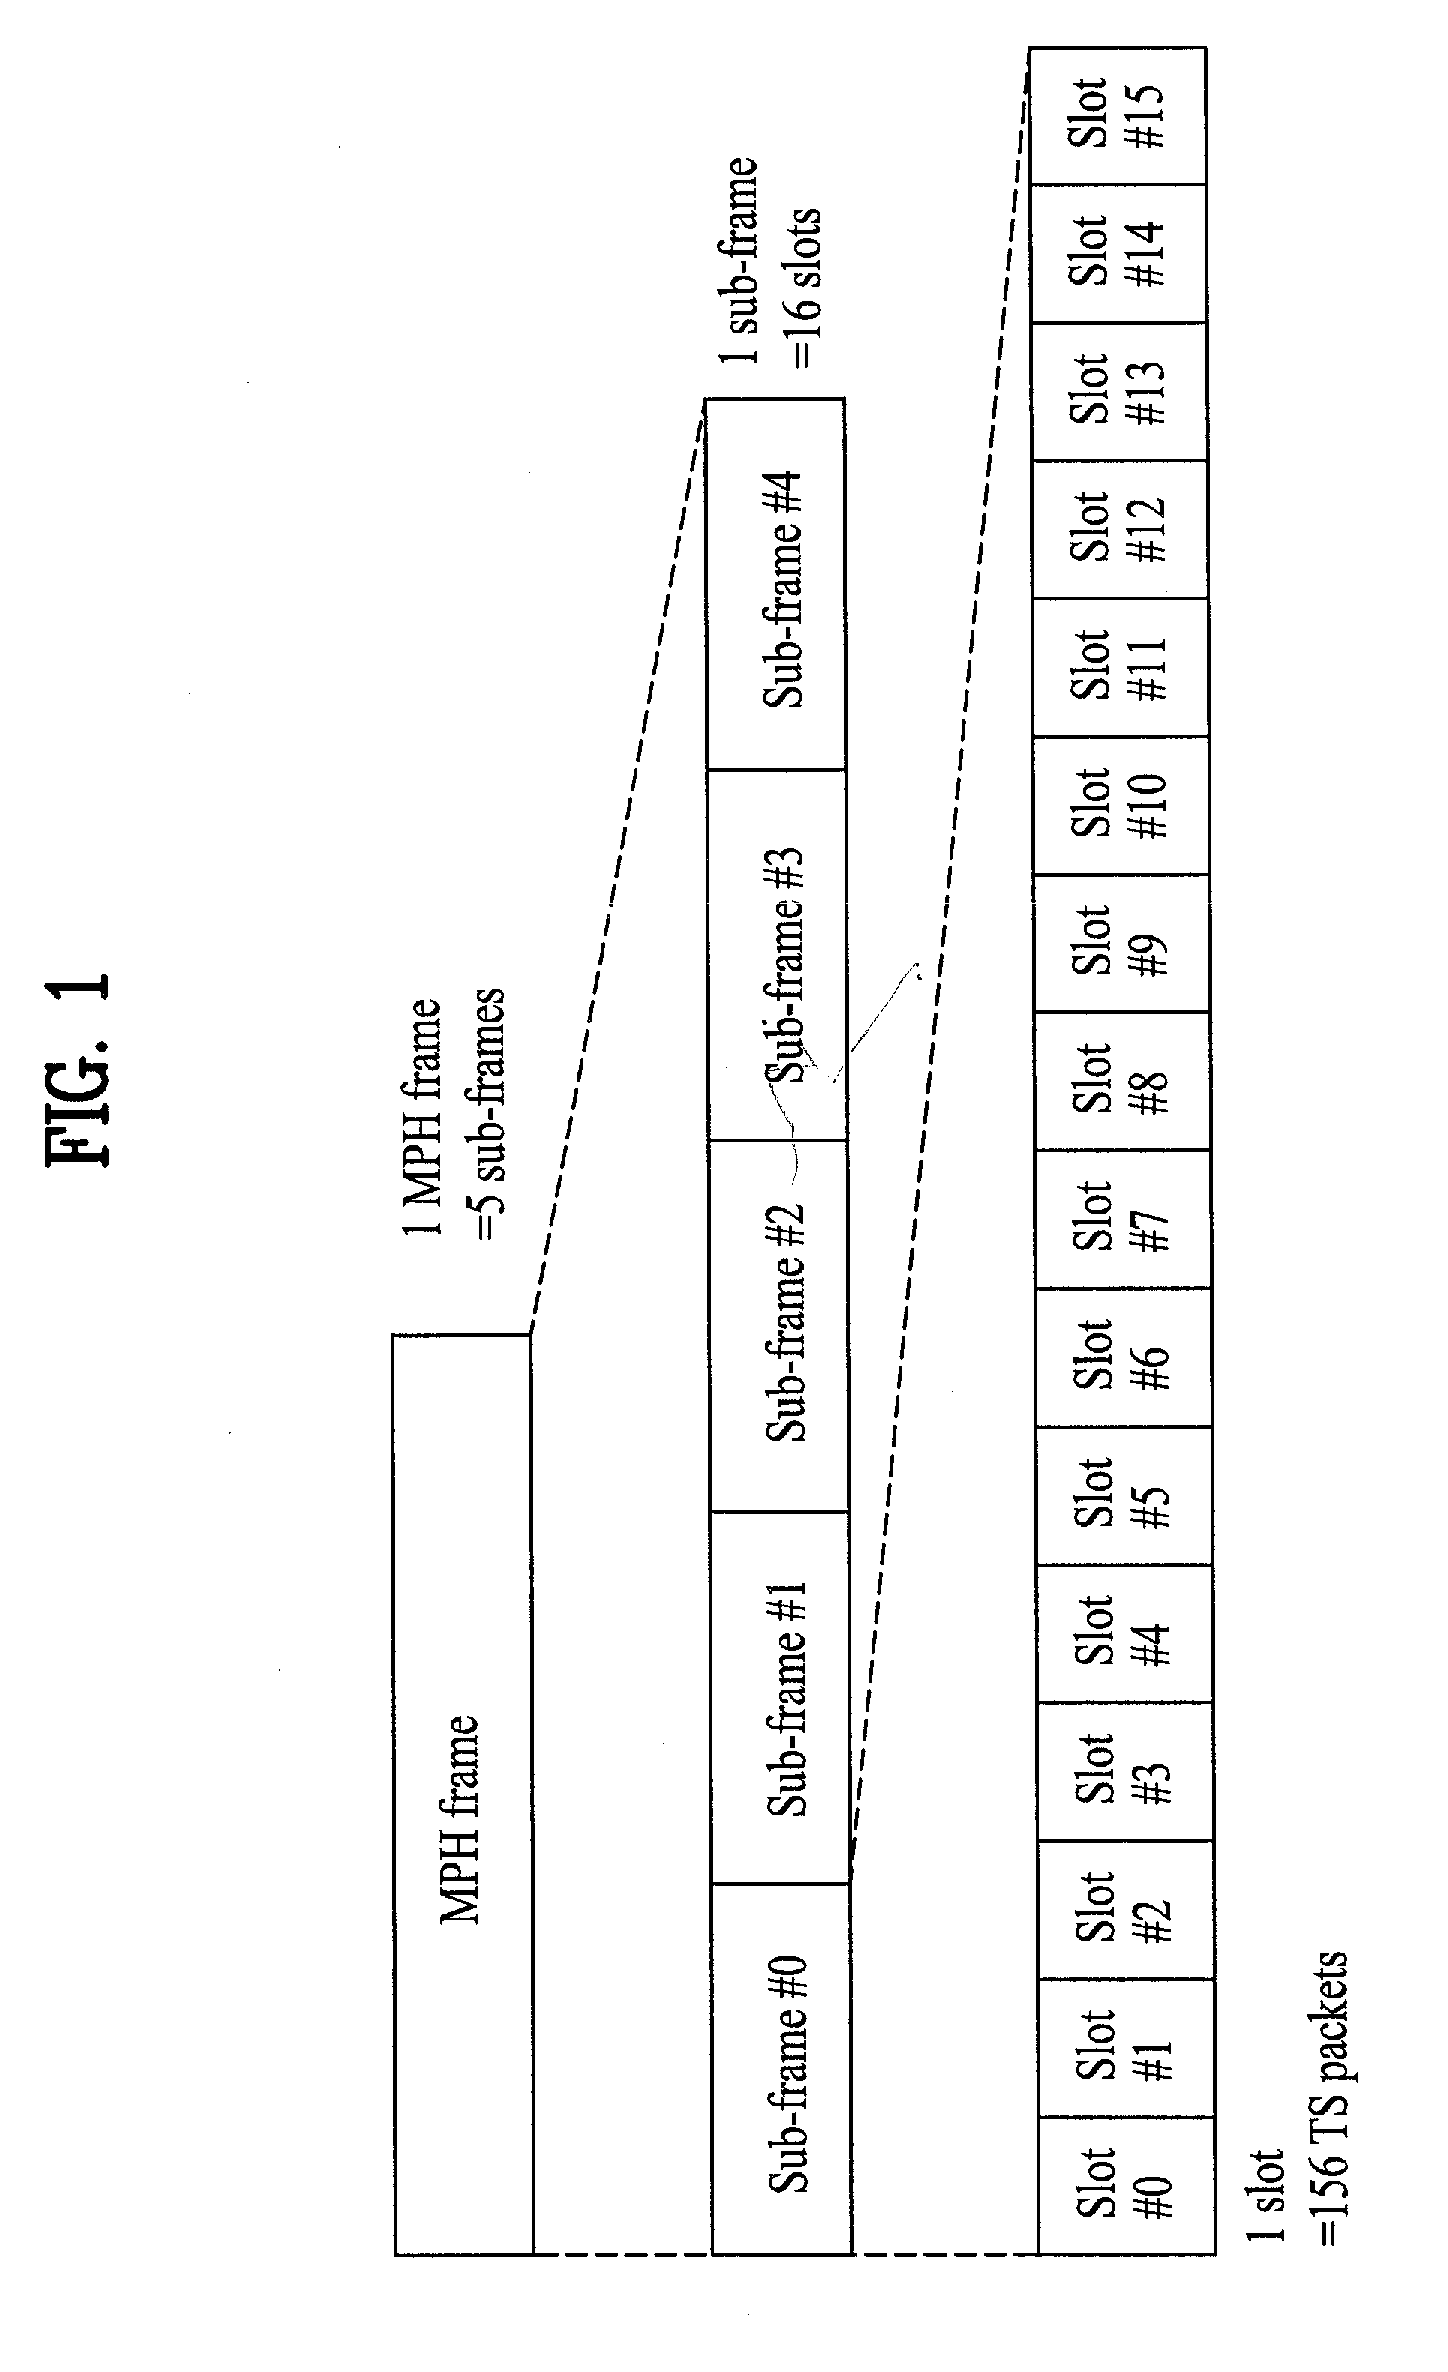 Digital broadcast system for transmitting/receiving digital broadcast data, and data processing method for use in the same